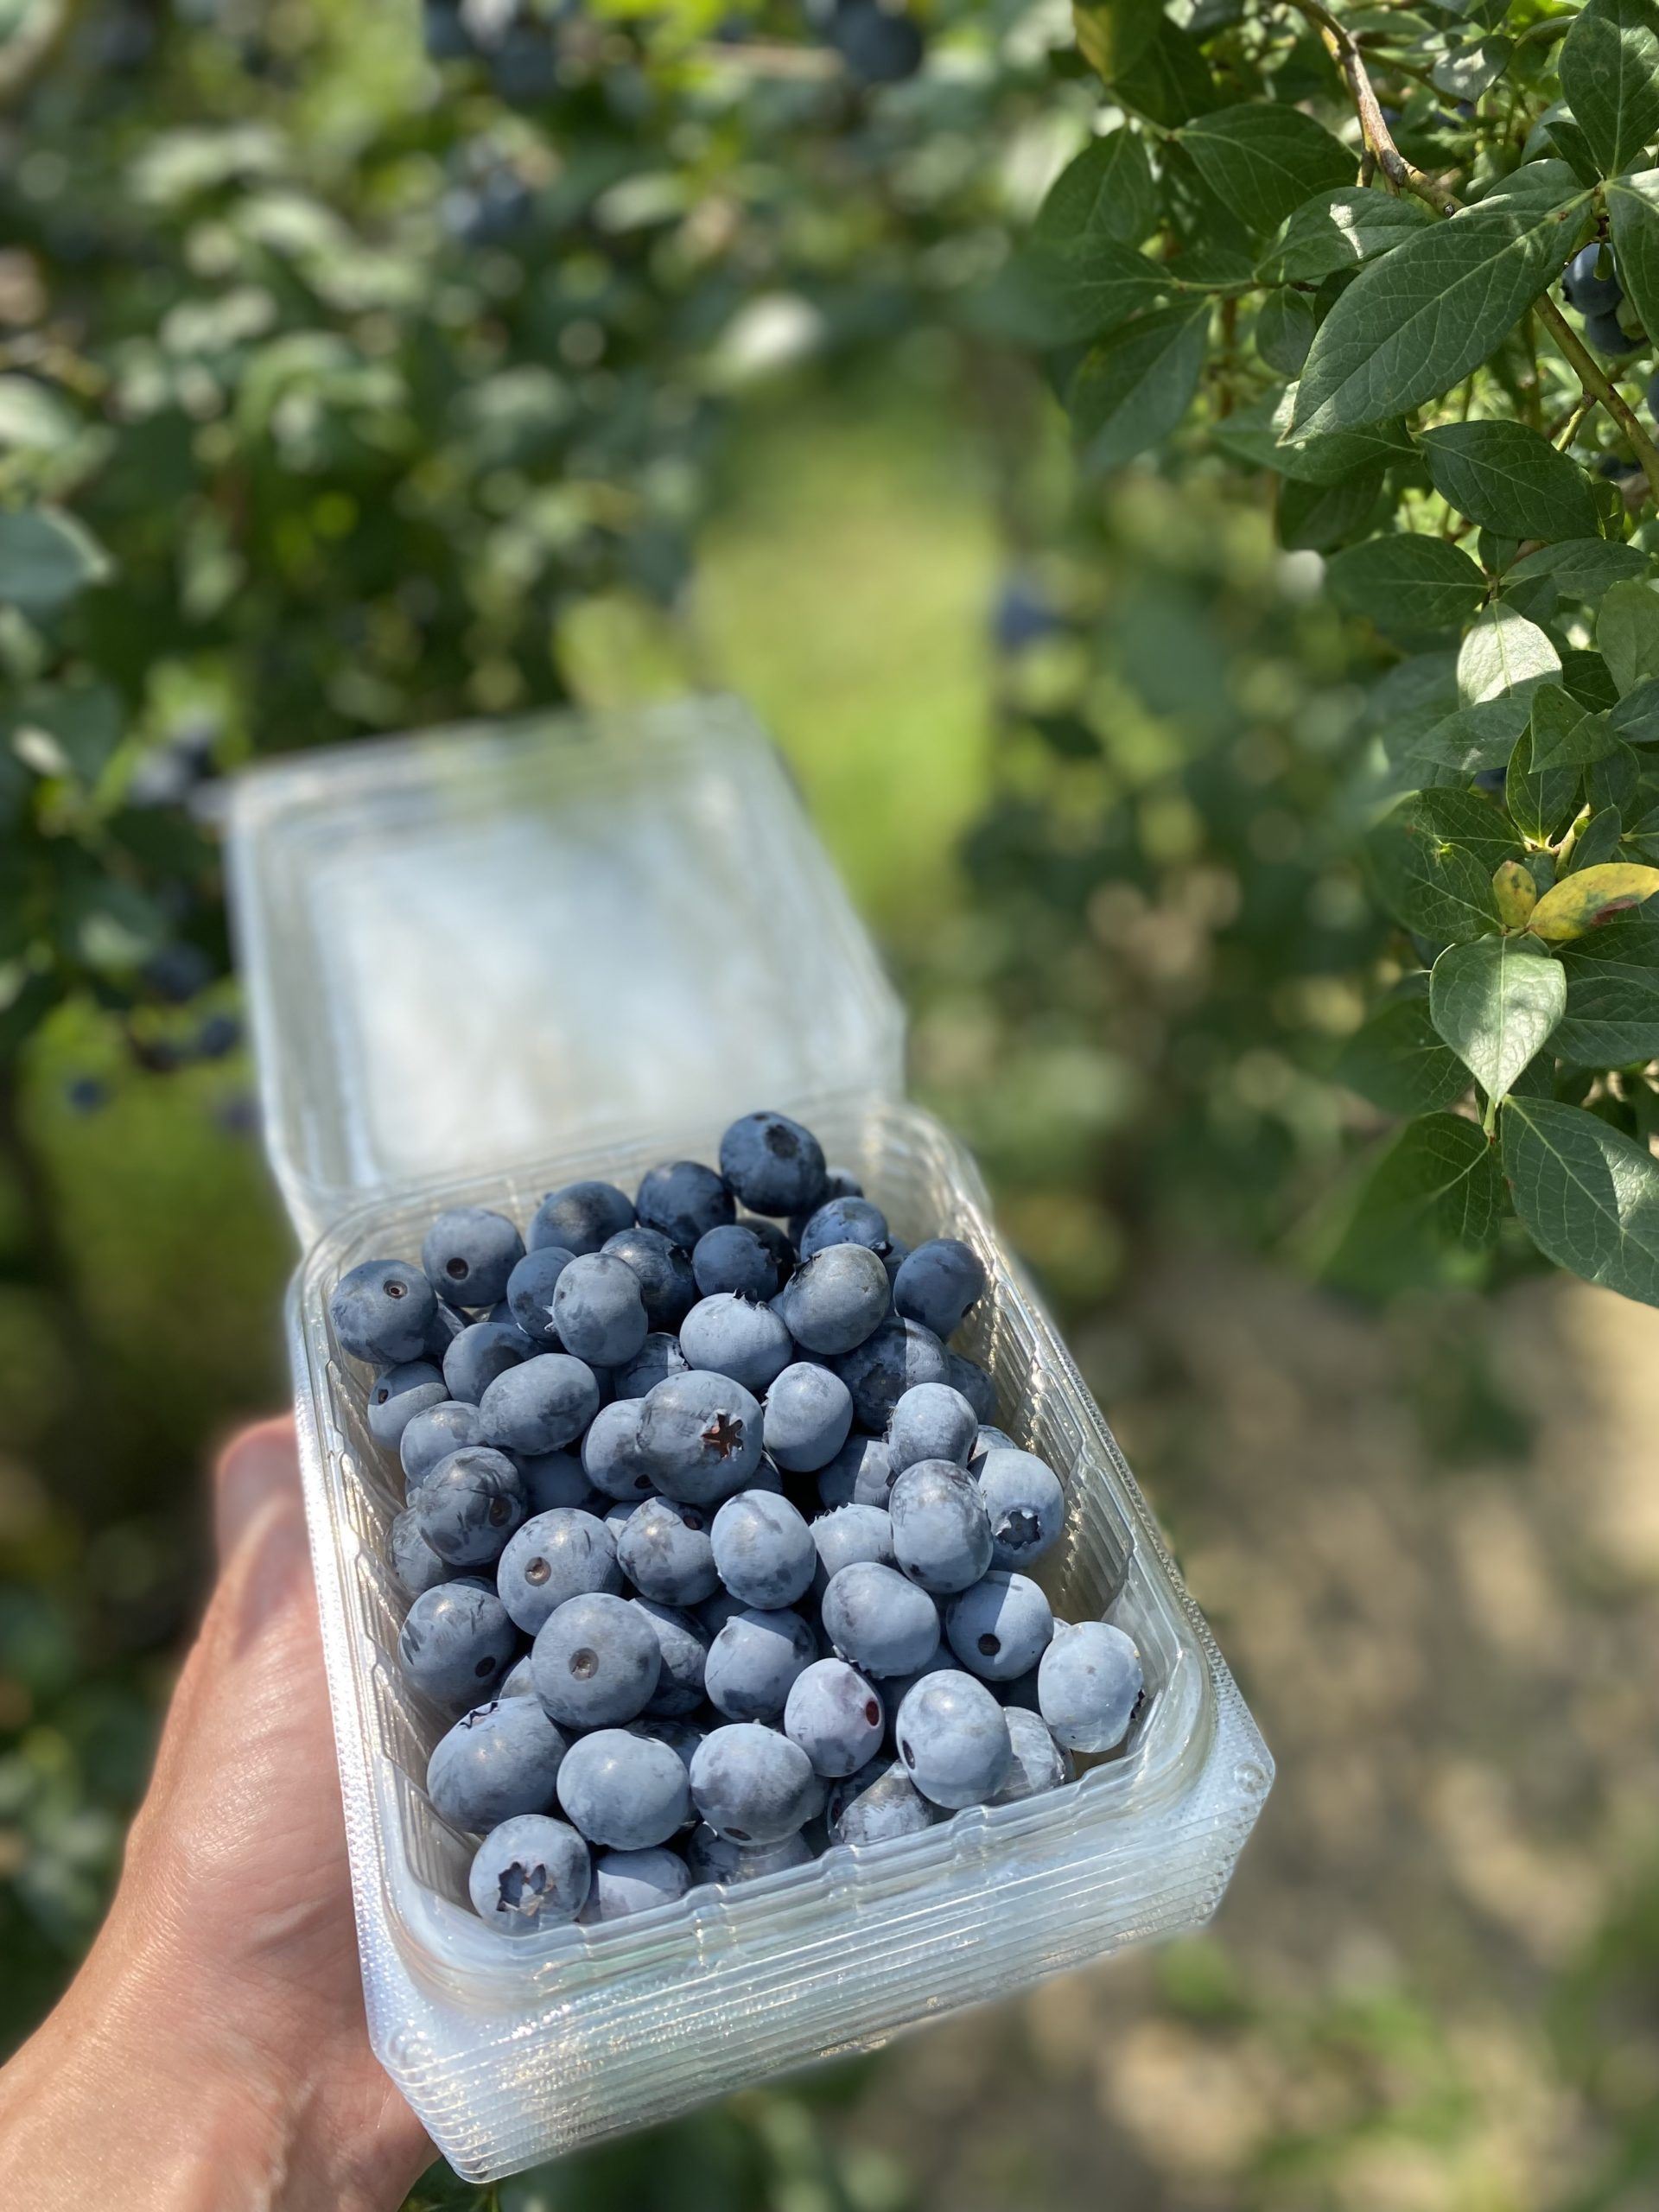 DiMeo Farms: Our Adventure Picking Blueberries In The Pine Barrens